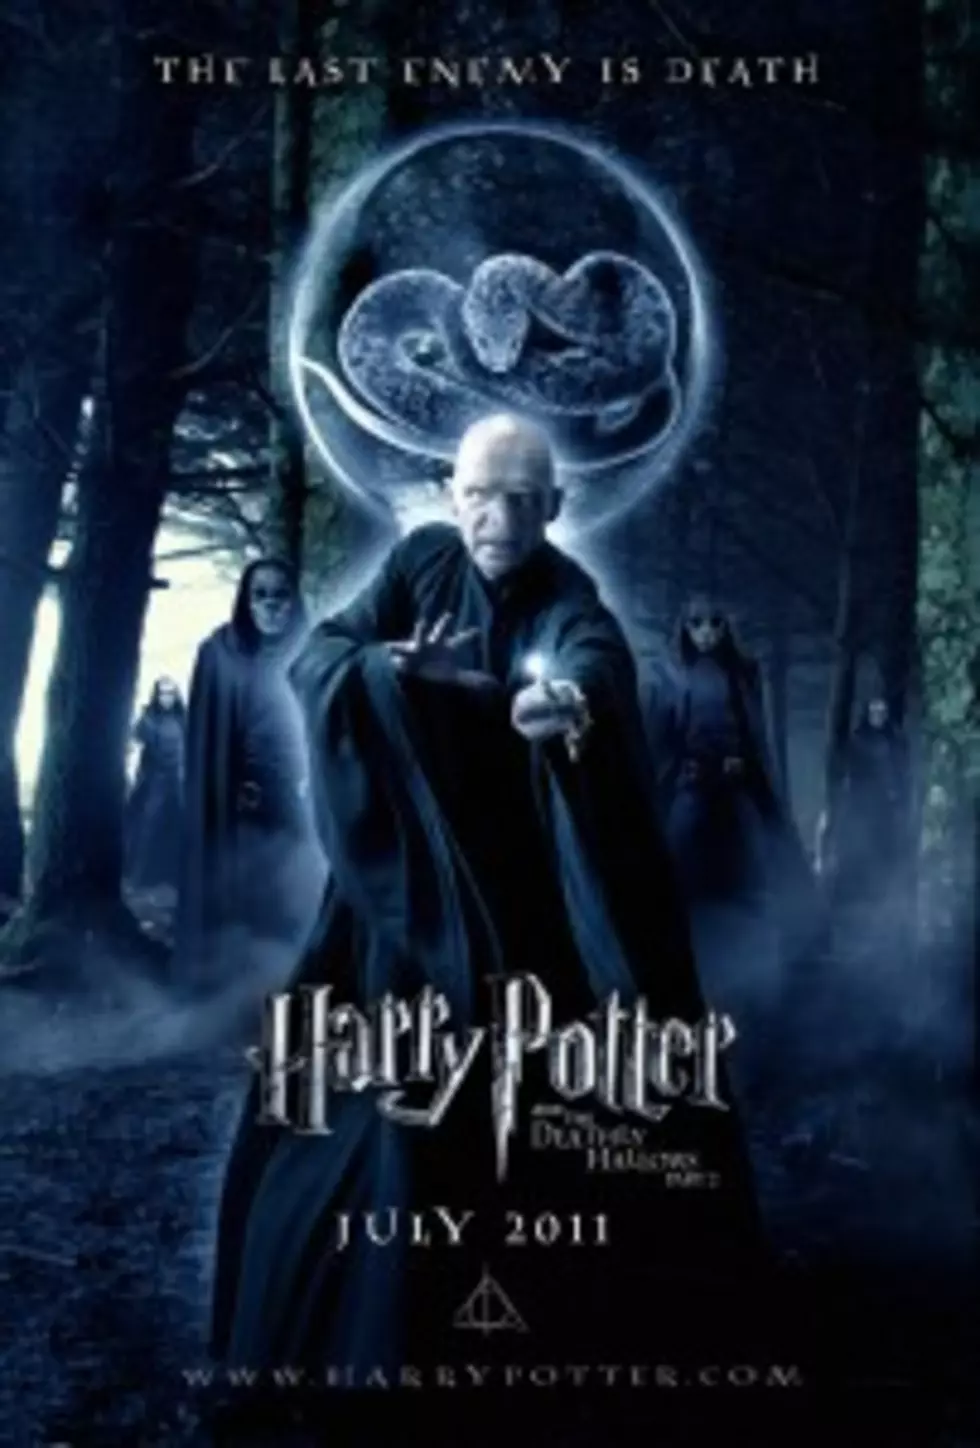 Harry Potter And The Deathly Hallows Pt. 2 Featurette [UPDATE ]